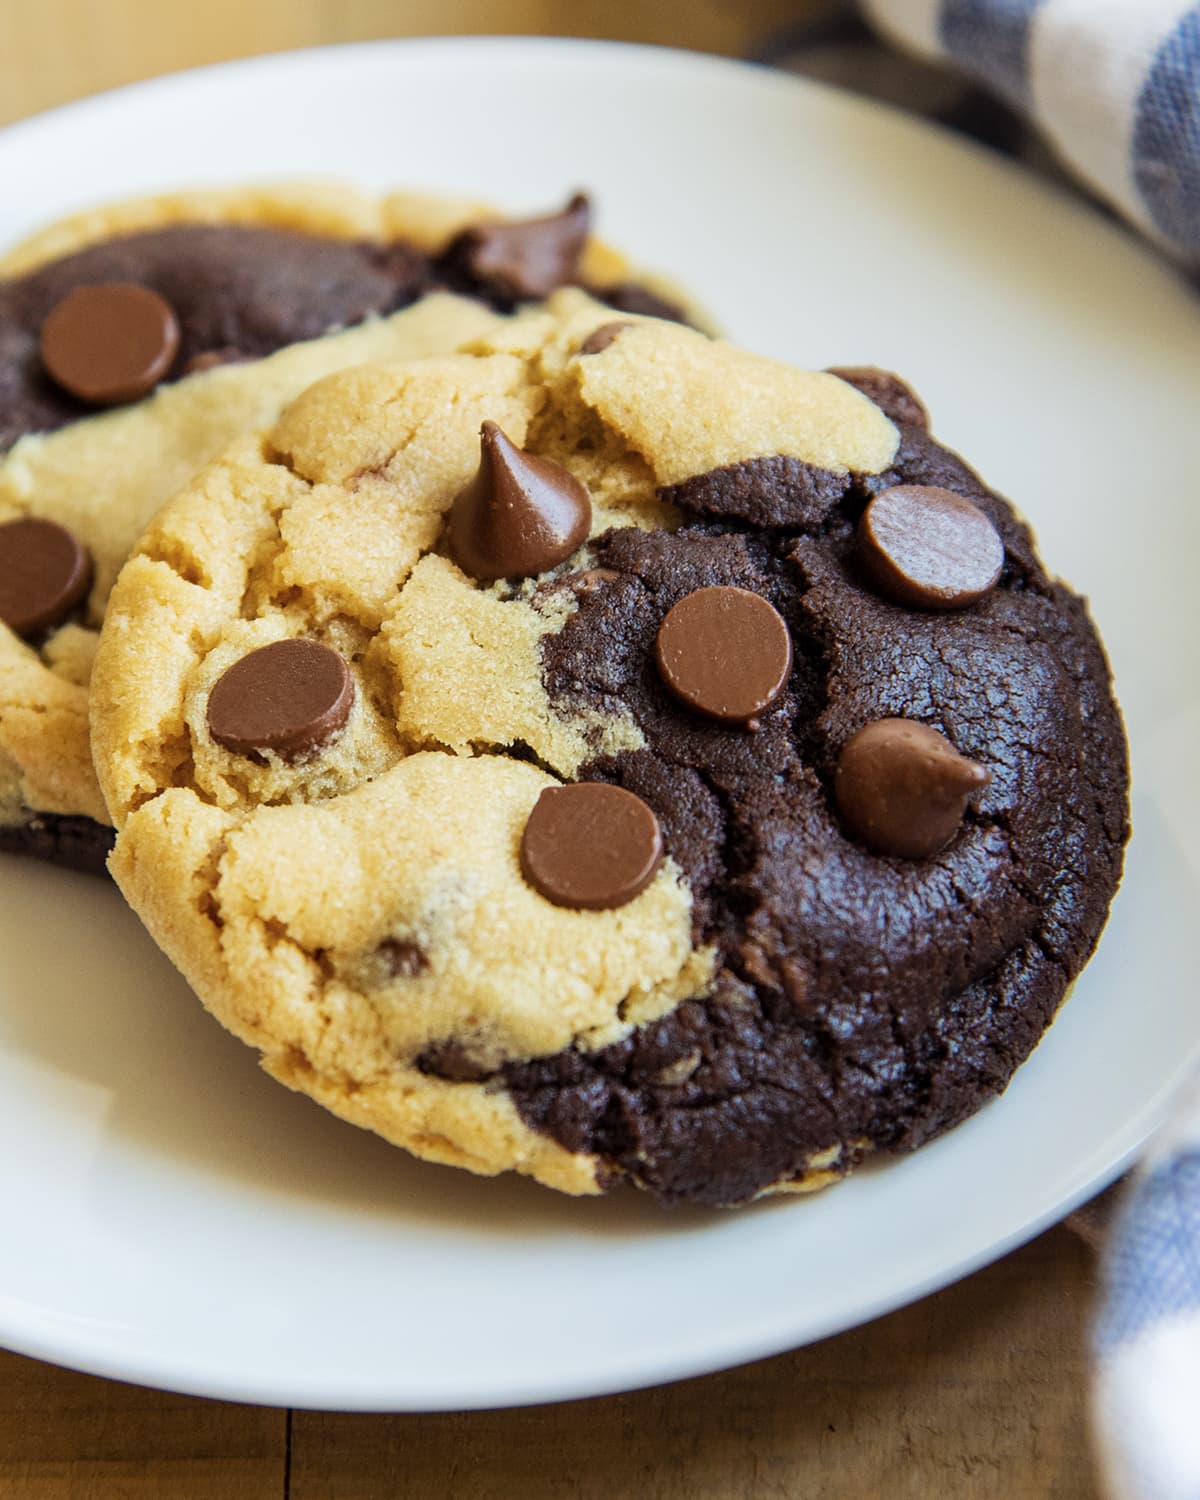 A close up of a chocolate and peanut butter swirled cookie with chocolate chips on top.